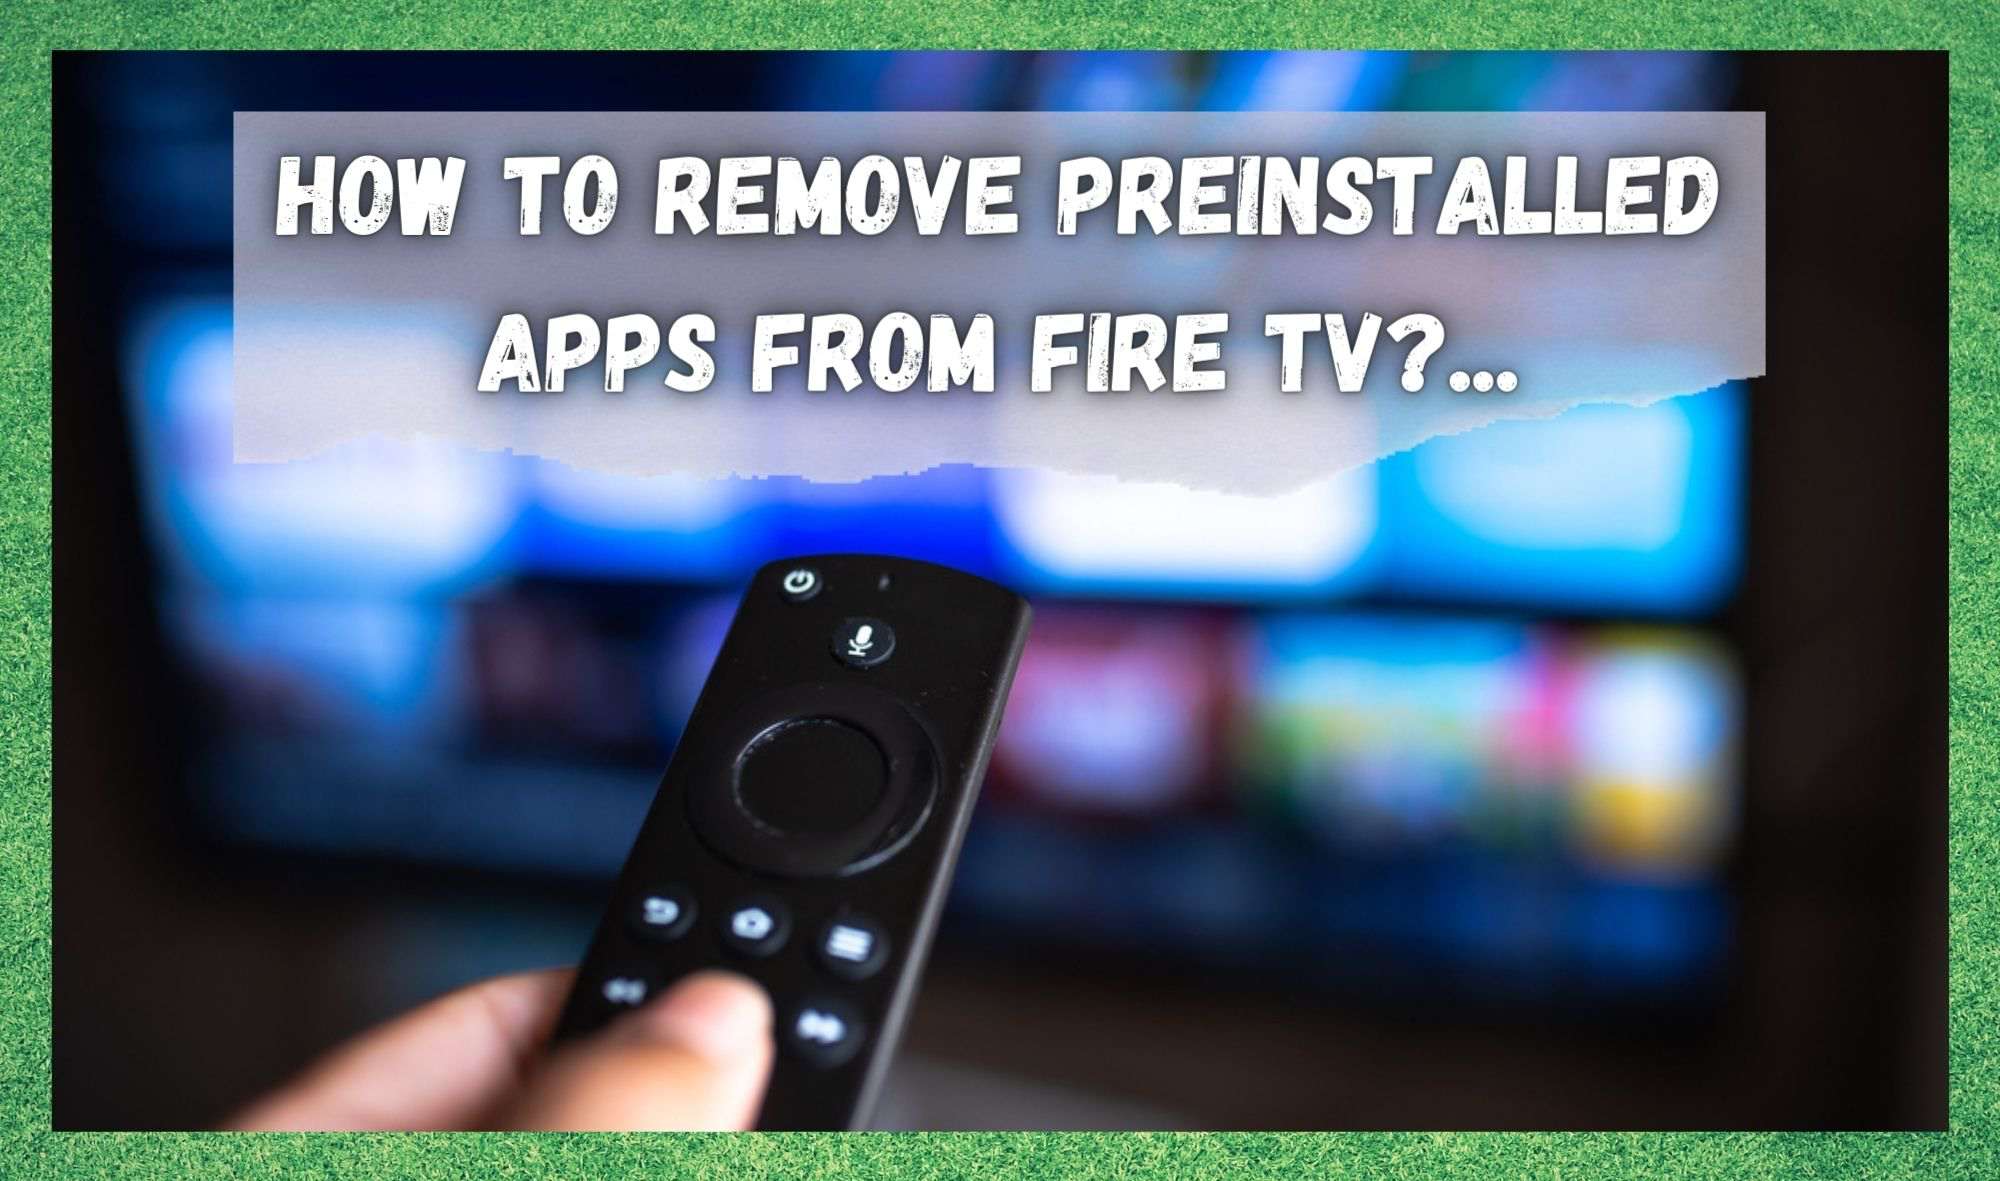 Remove Preinstalled Apps From Fire TV